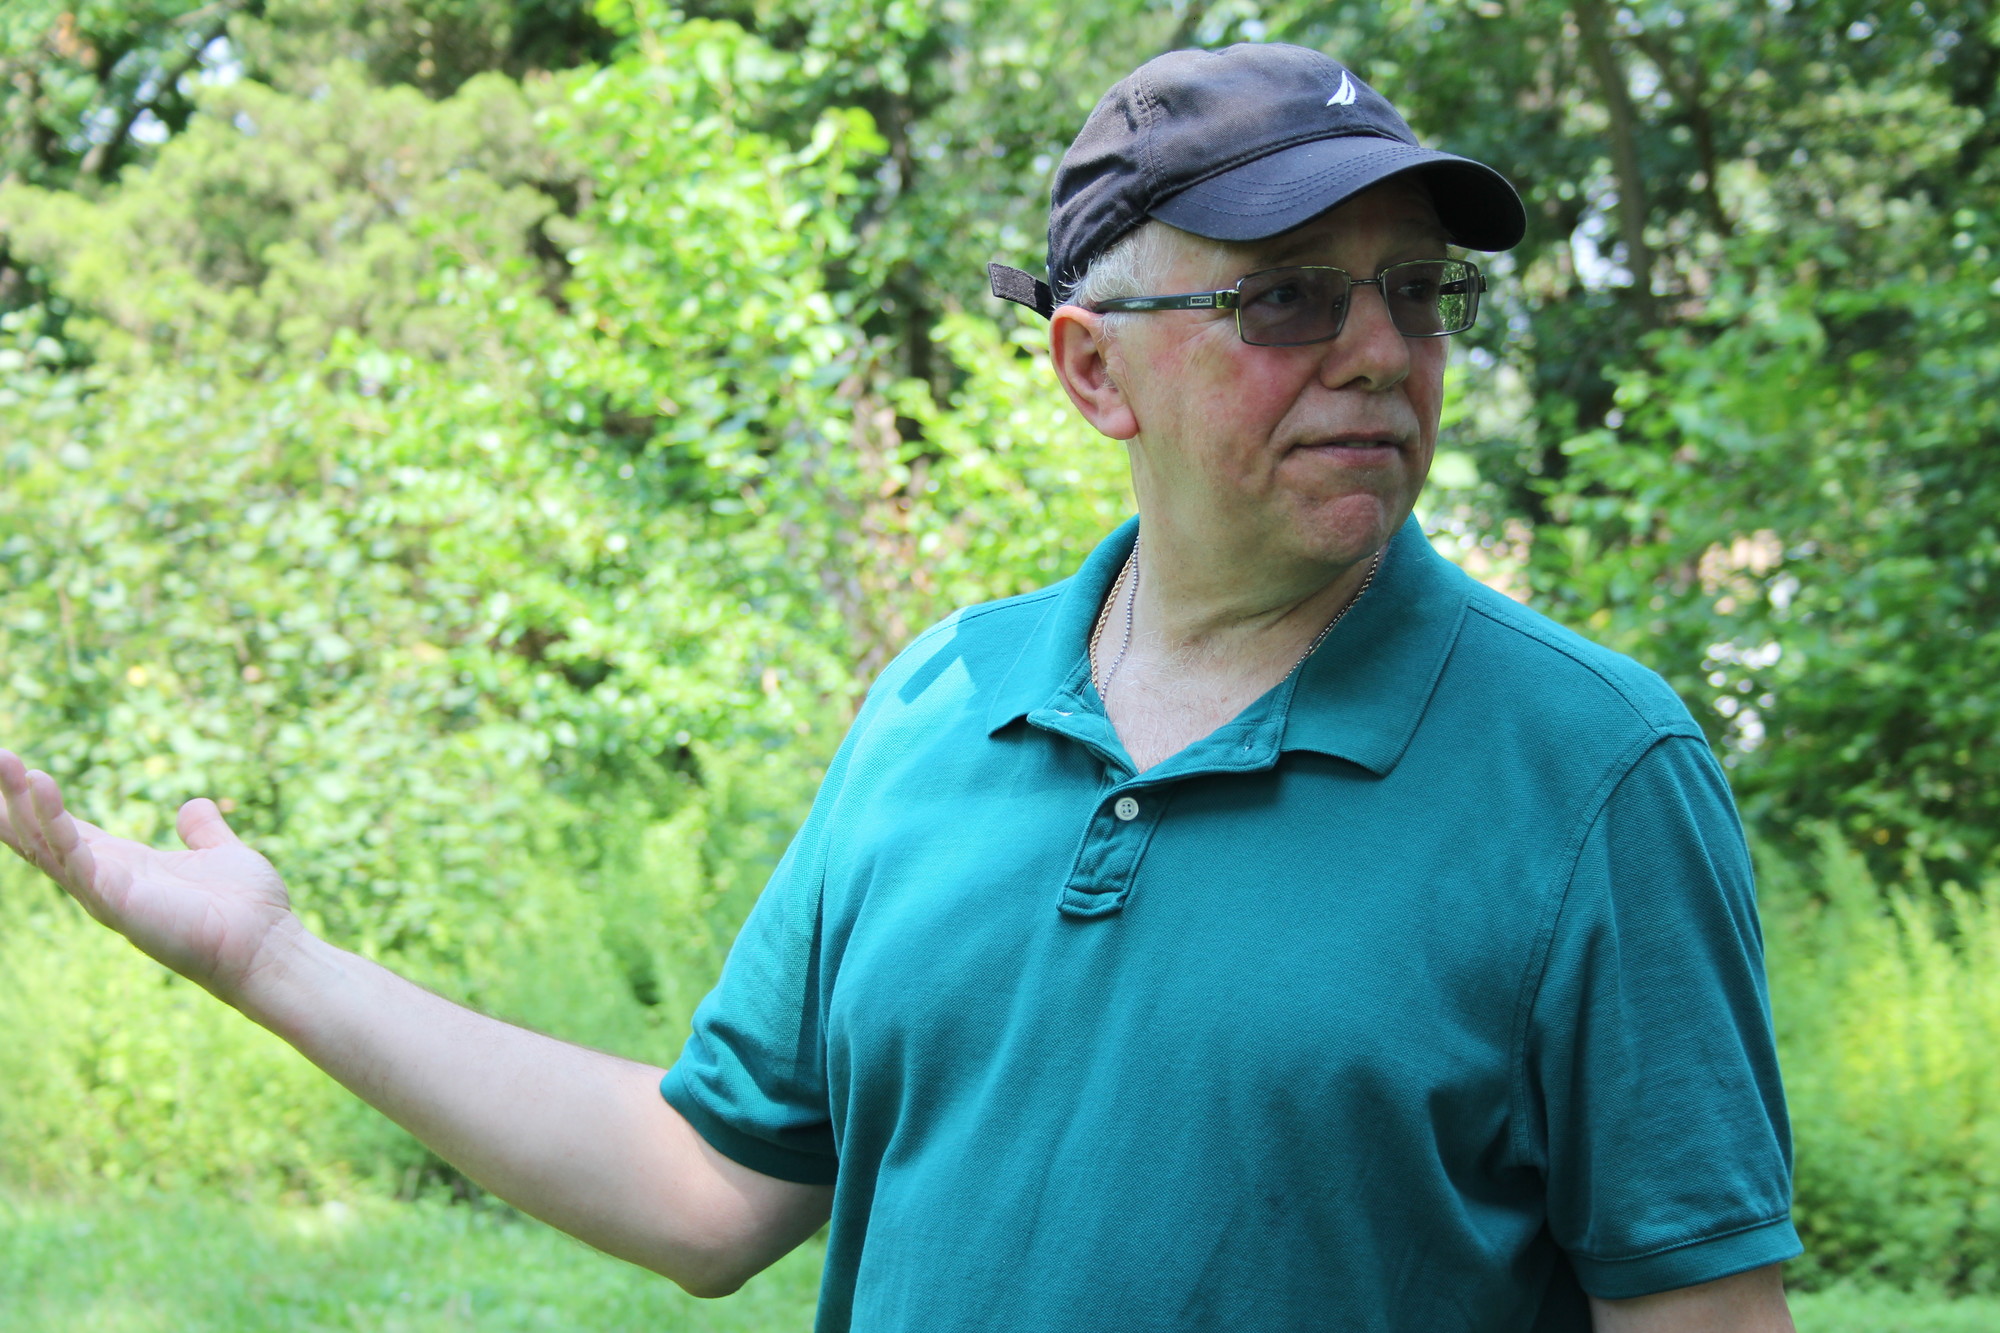 Joseph Parisi, the president of CEMCO for 15 years, gave the Herald a tour of the preserve last week.